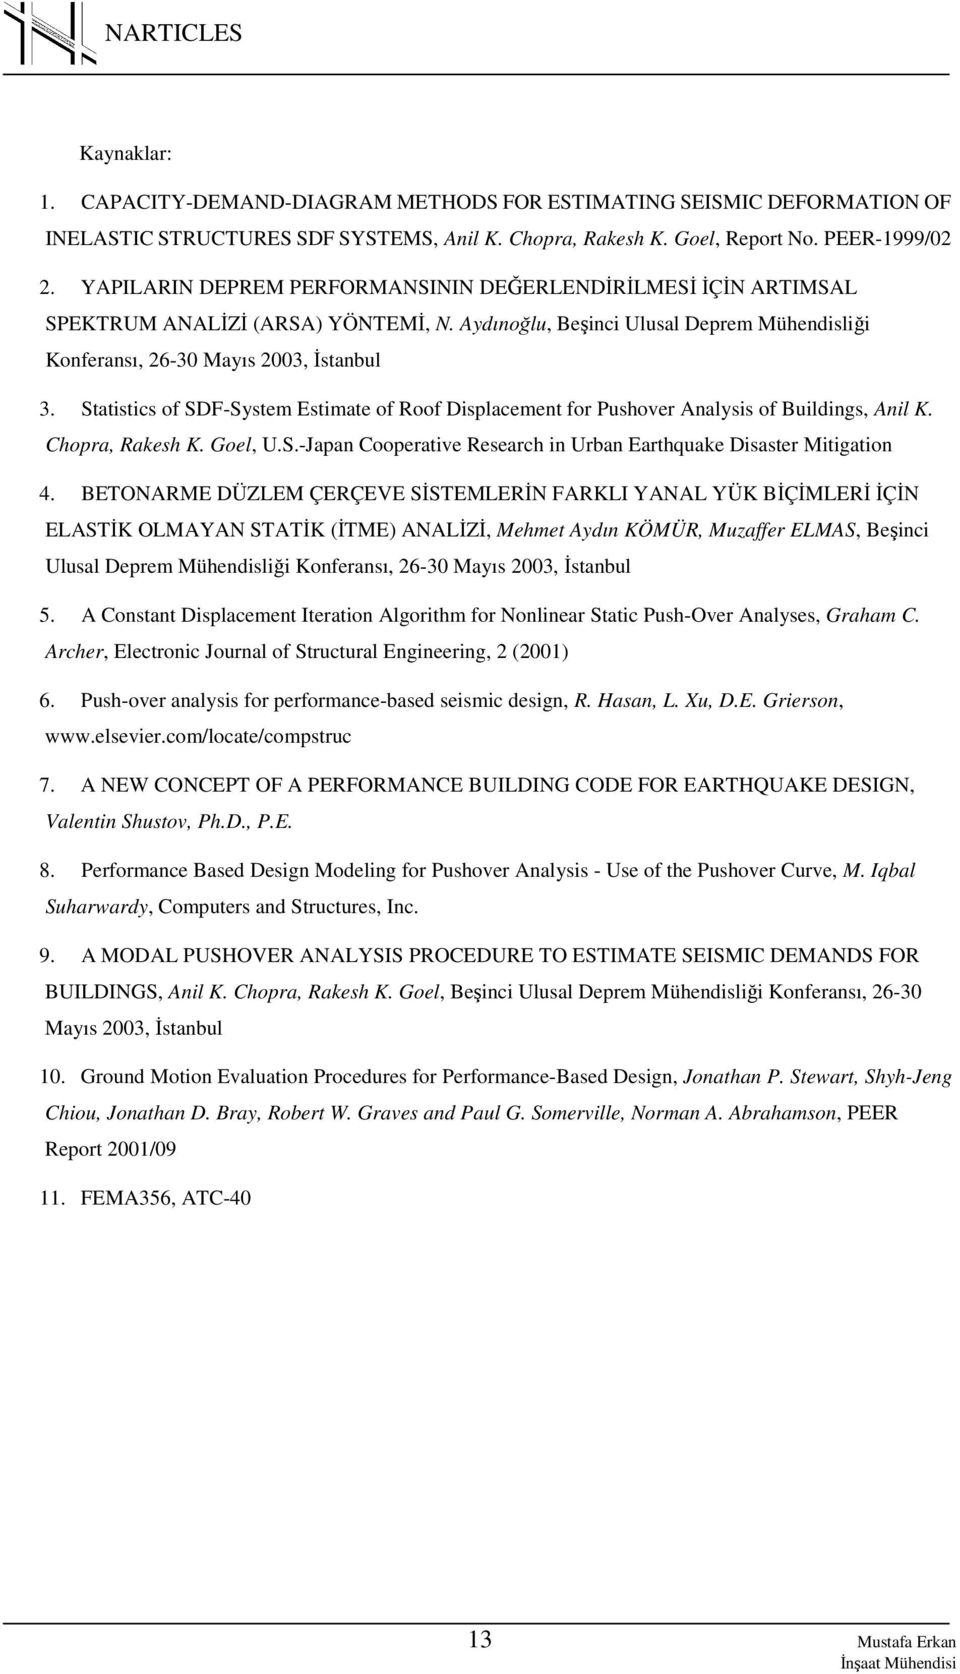 Statistics of SDF-System Estimate of Roof Displacement for Pushover Analysis of Buildings, Anil K. Chopra, Rakesh K. Goel, U.S.-Japan Cooperative Research in Urban Earthquake Disaster Mitigation 4.